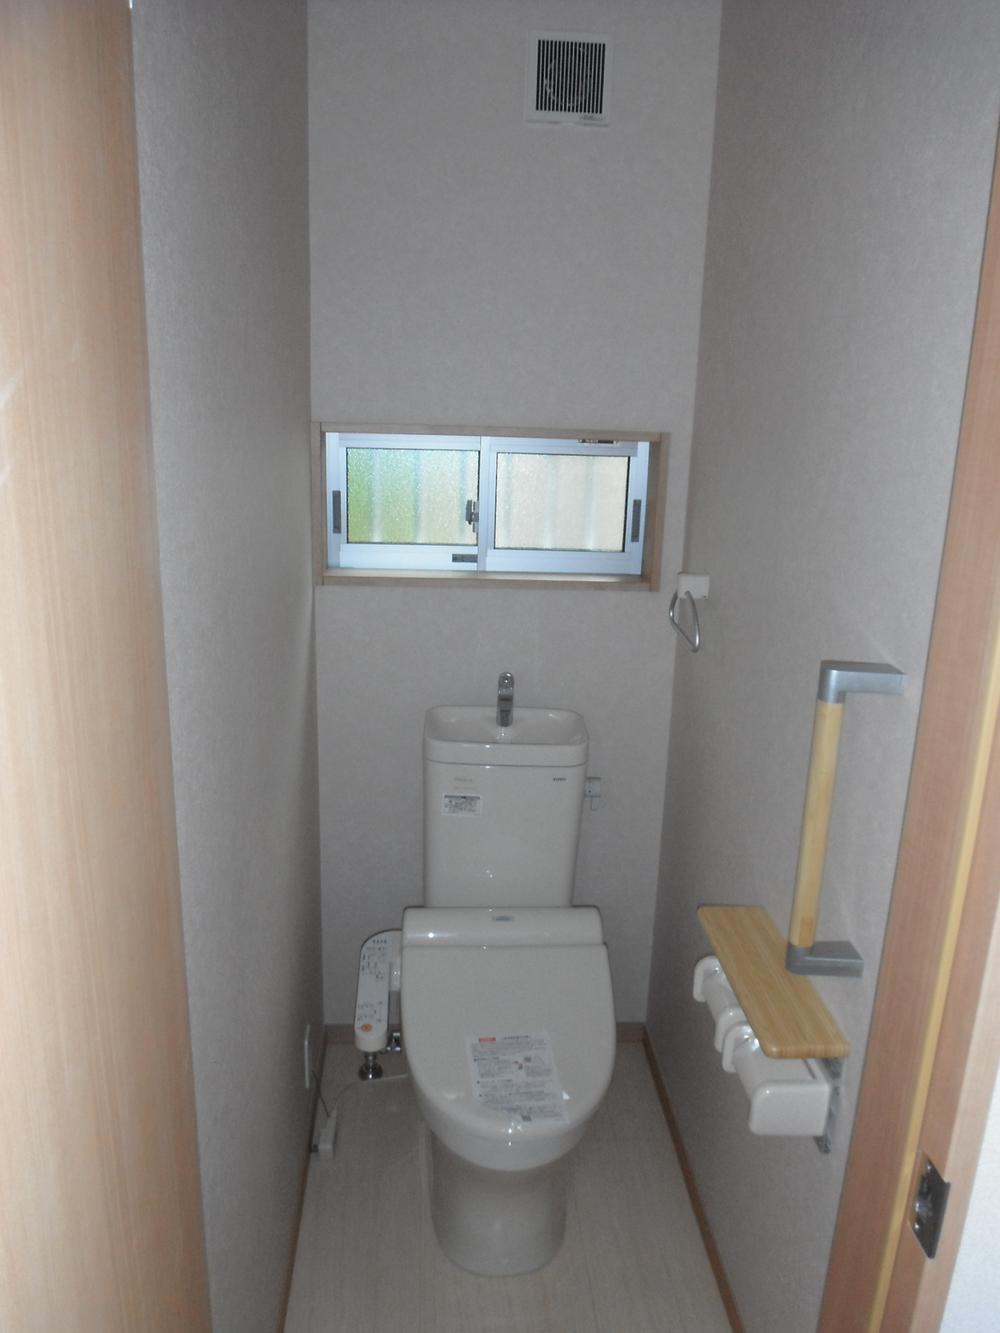 Toilet. The first floor is a toilet (with washlet). 